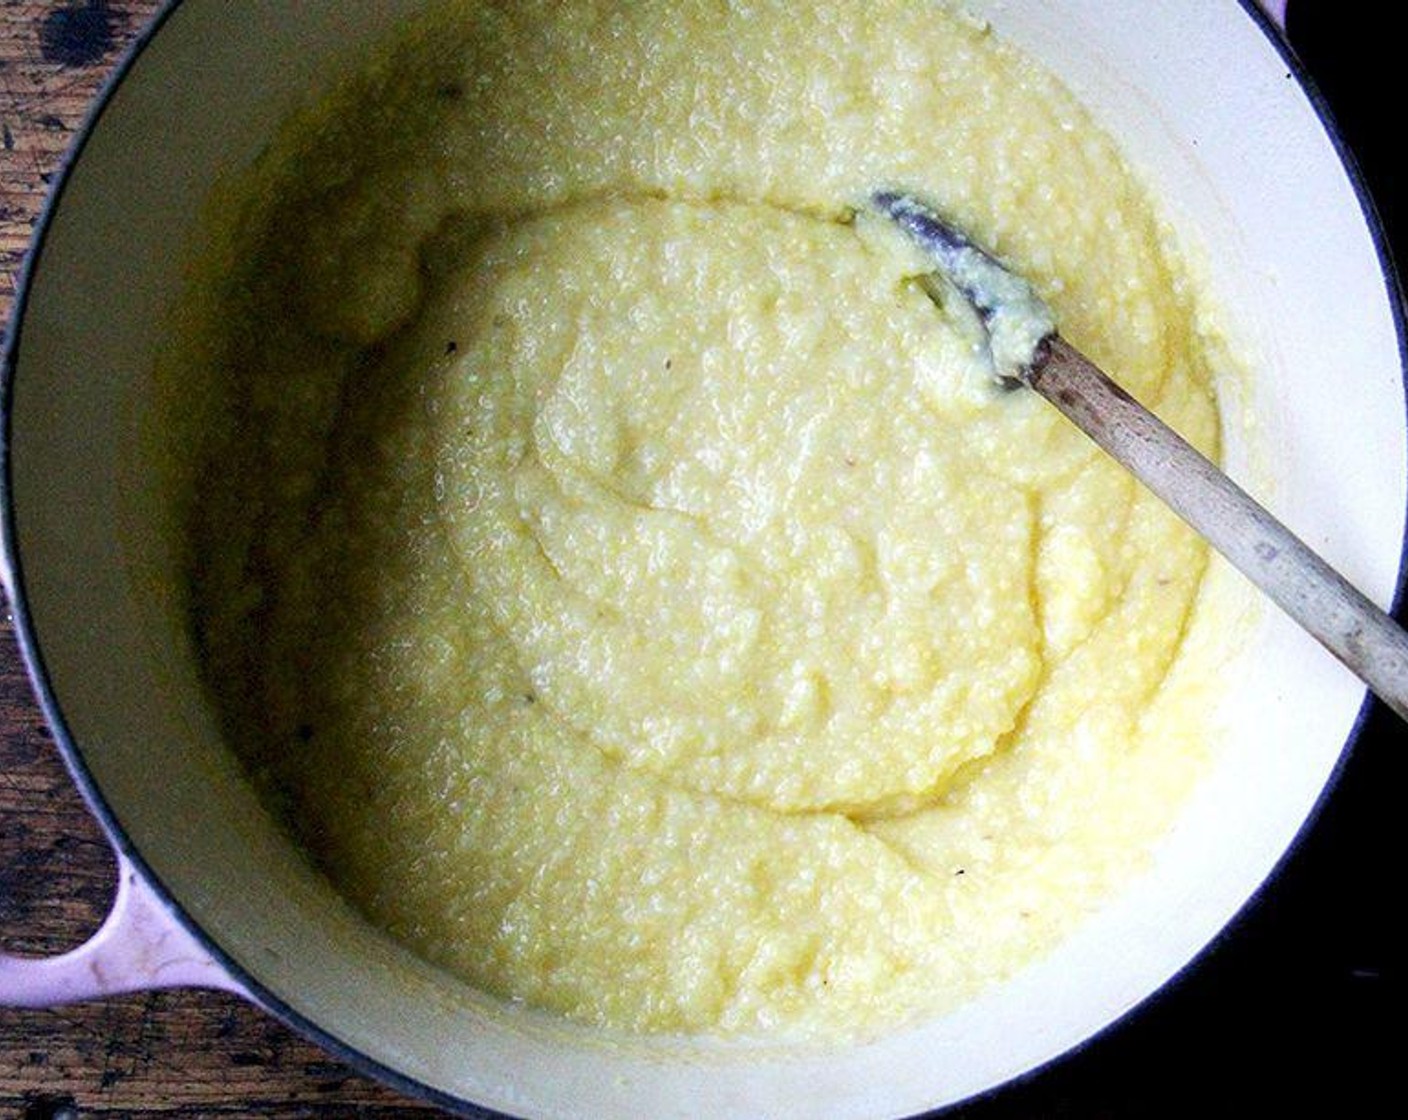 step 2 Bake uncovered for 40 minutes. Stir the polenta, taste, add salt if needed, and bake for another 10 to 20 minutes or longer—until it reaches the consistency you like. Remove from the oven, stir, and serve immediately or cover and keep warm until you are ready to serve.